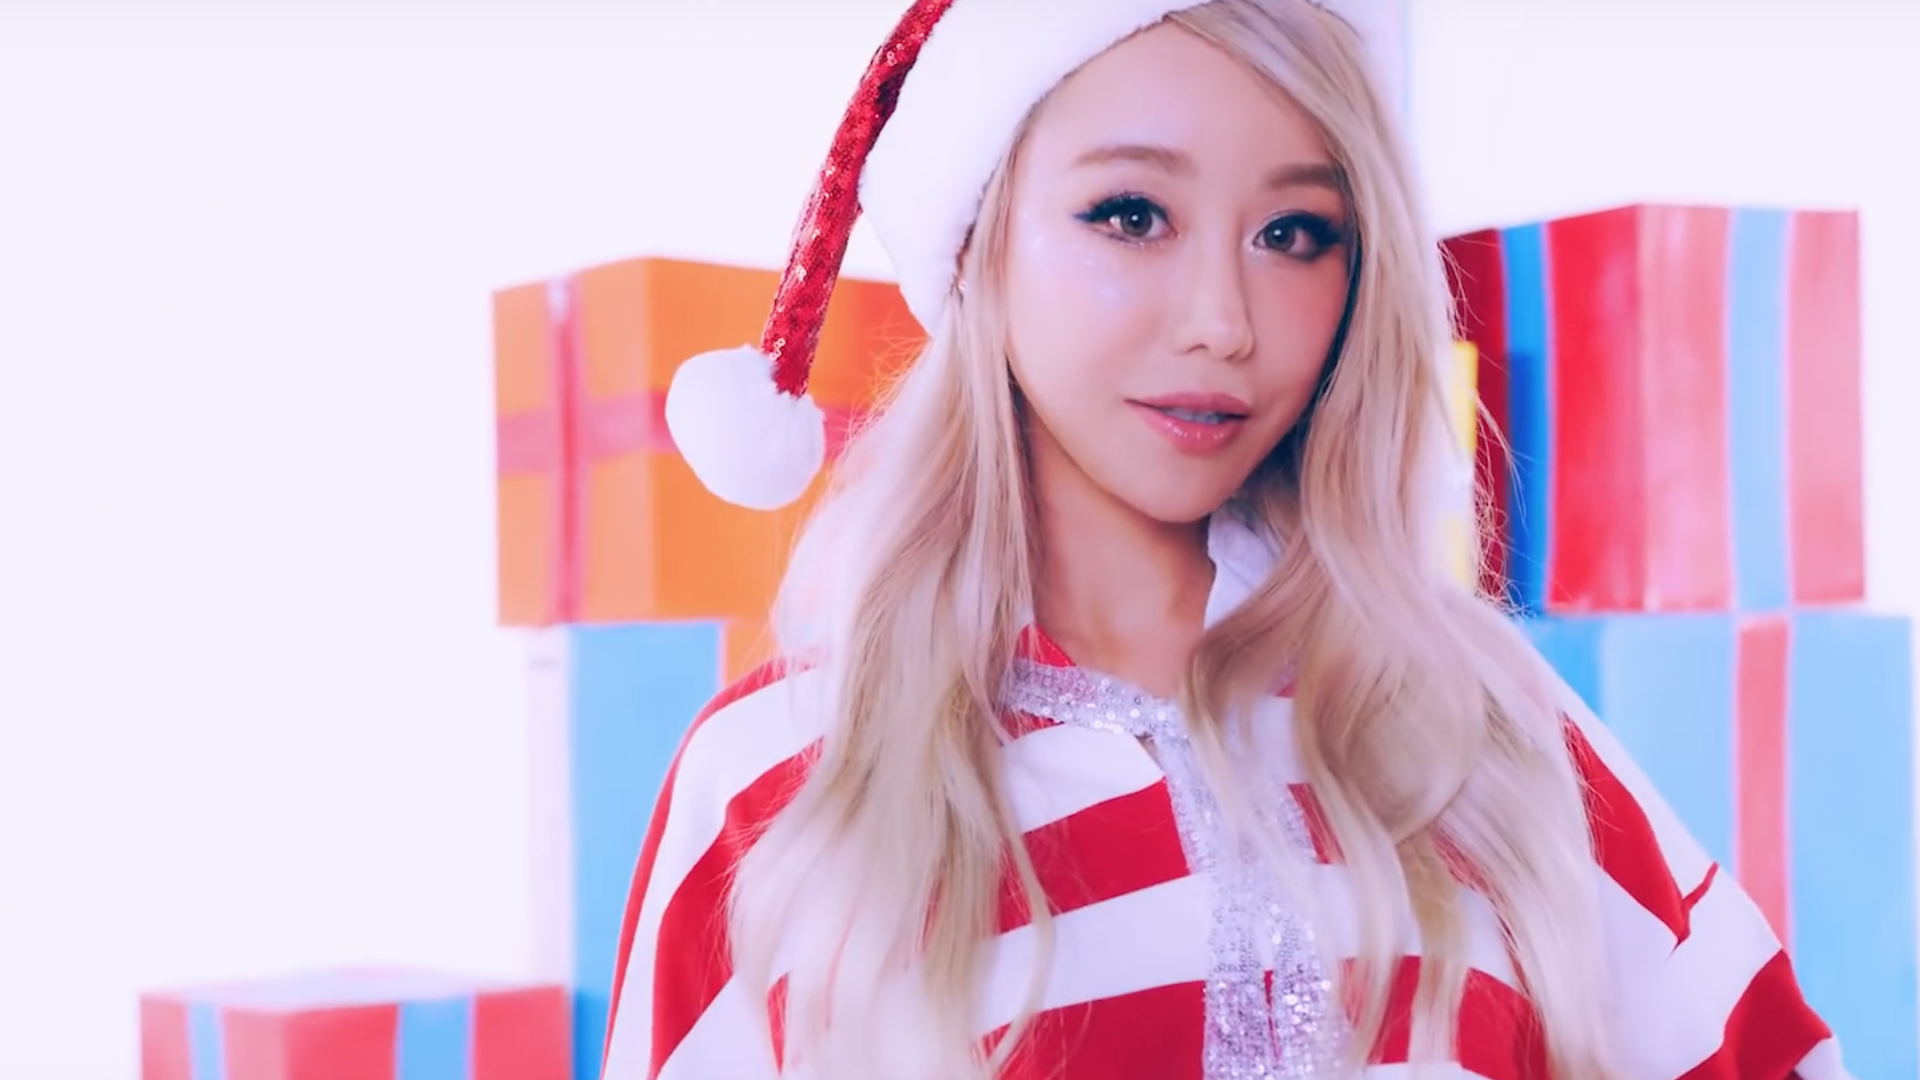 Wengie stars in her own Christmas video